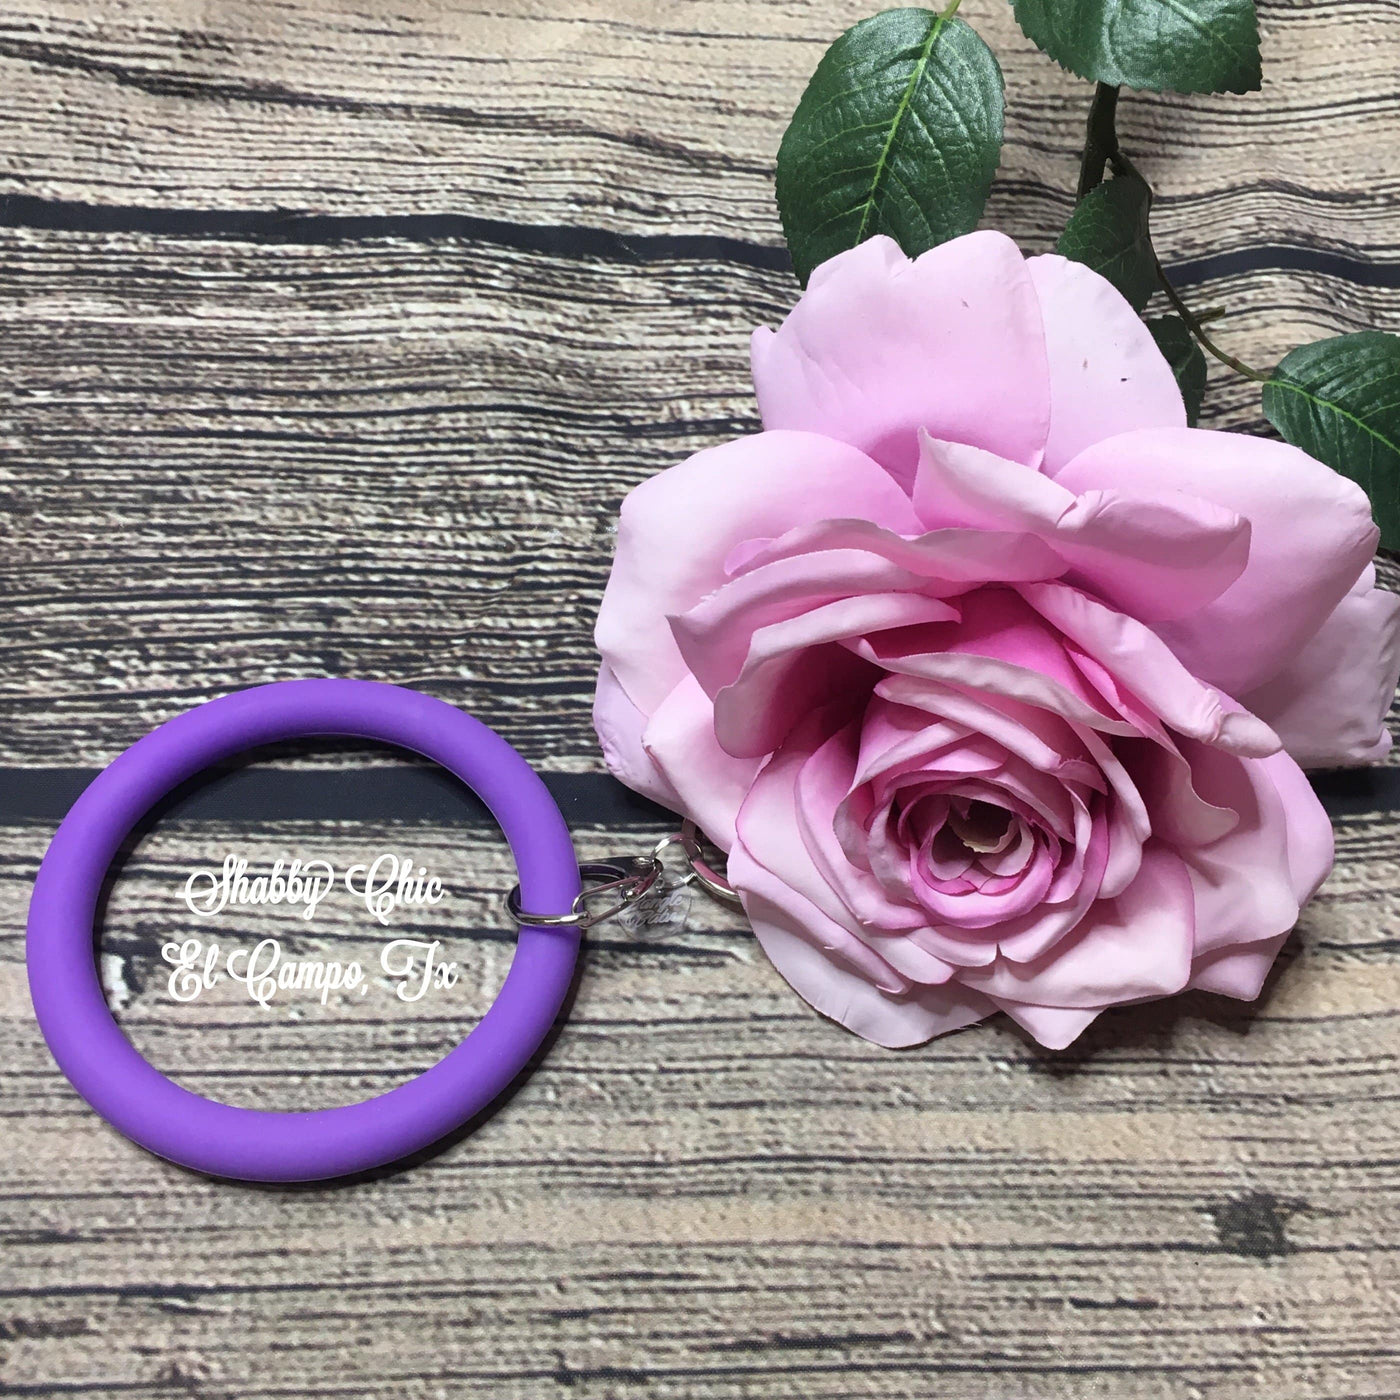 Silicone Bracelet Key Ring Shabby Chic Boutique and Tanning Salon Purple